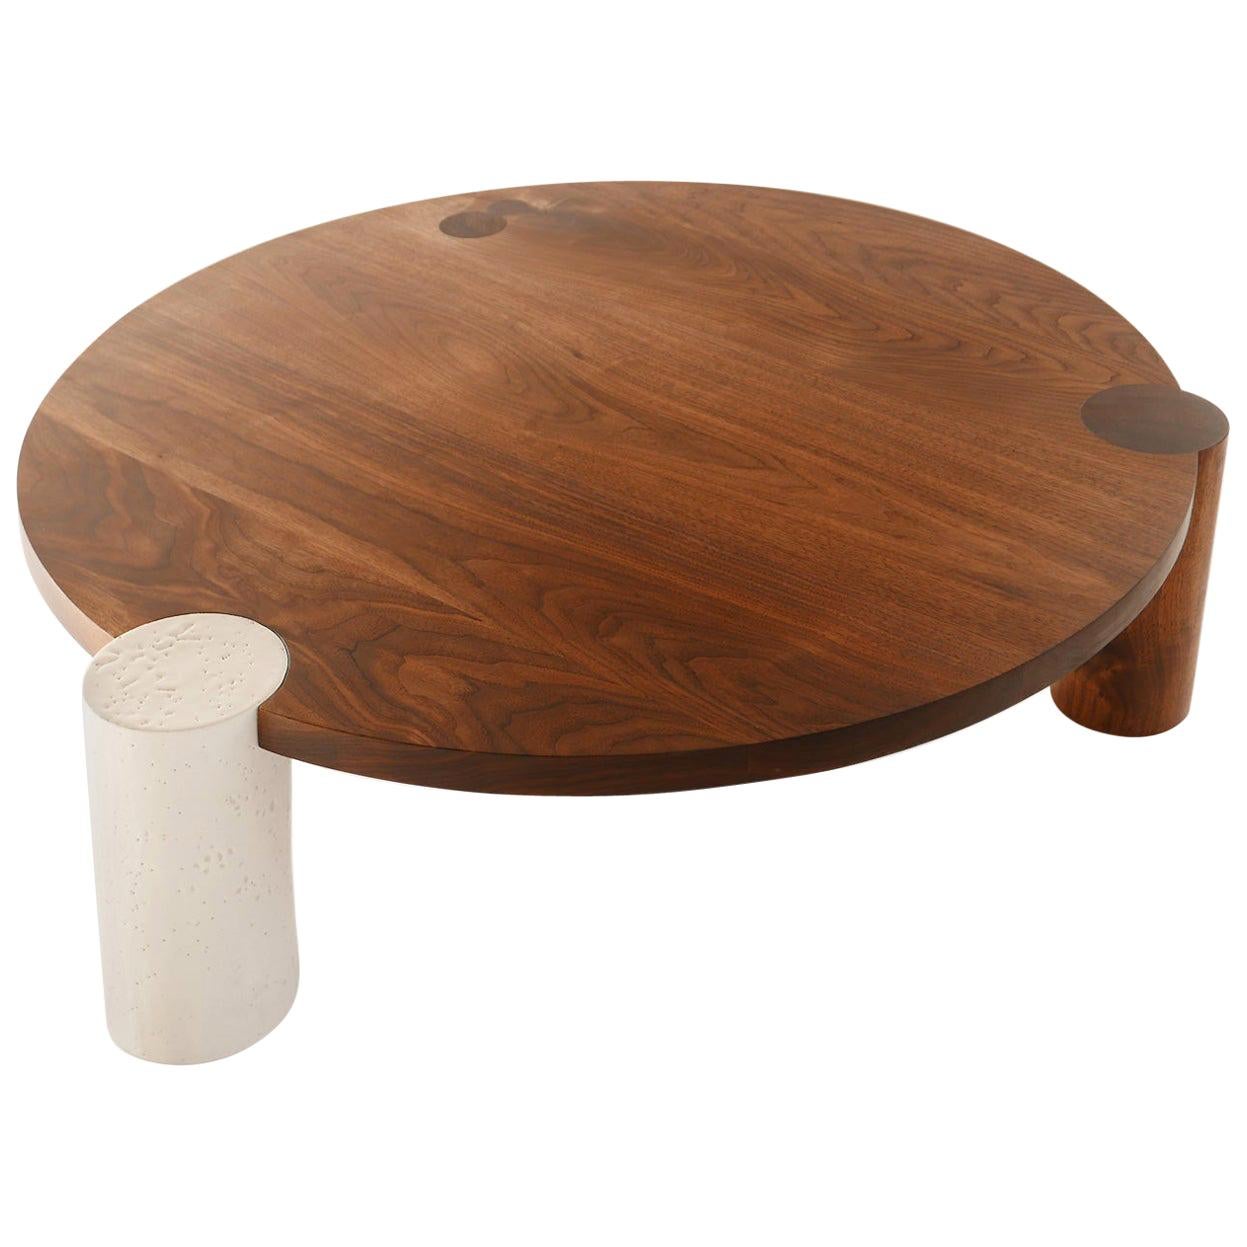 Black Walnut 36" Coffee Table with Ceramic Feature Leg by Hinterland Design